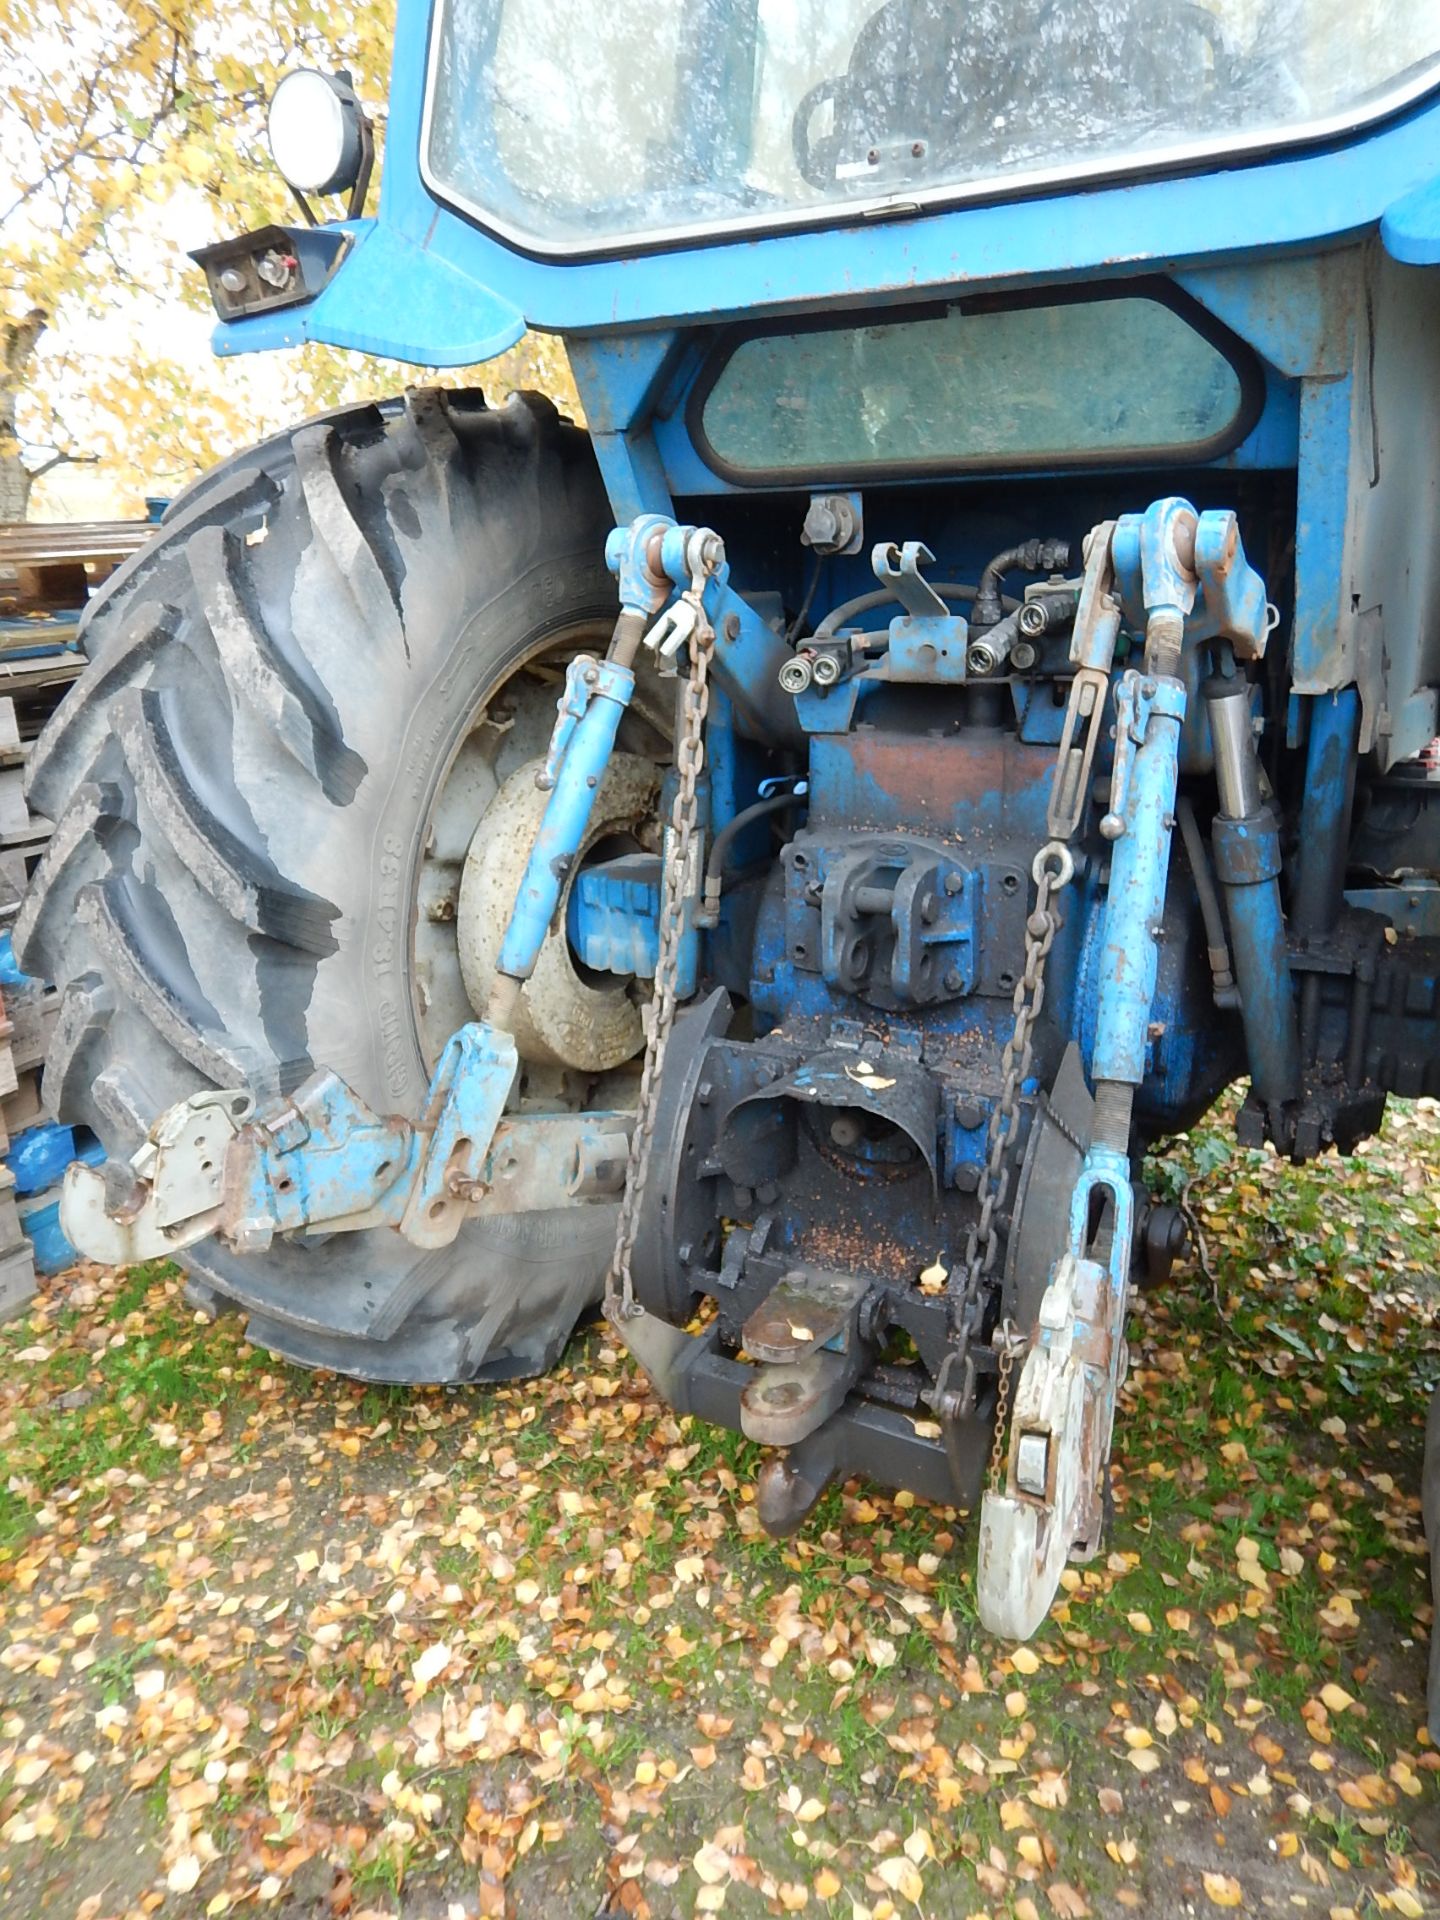 1985 FORD TW-25 4wd TRACTOR Fitted with front underslung weight, rear inside wheel weights, Q cab - Image 12 of 12